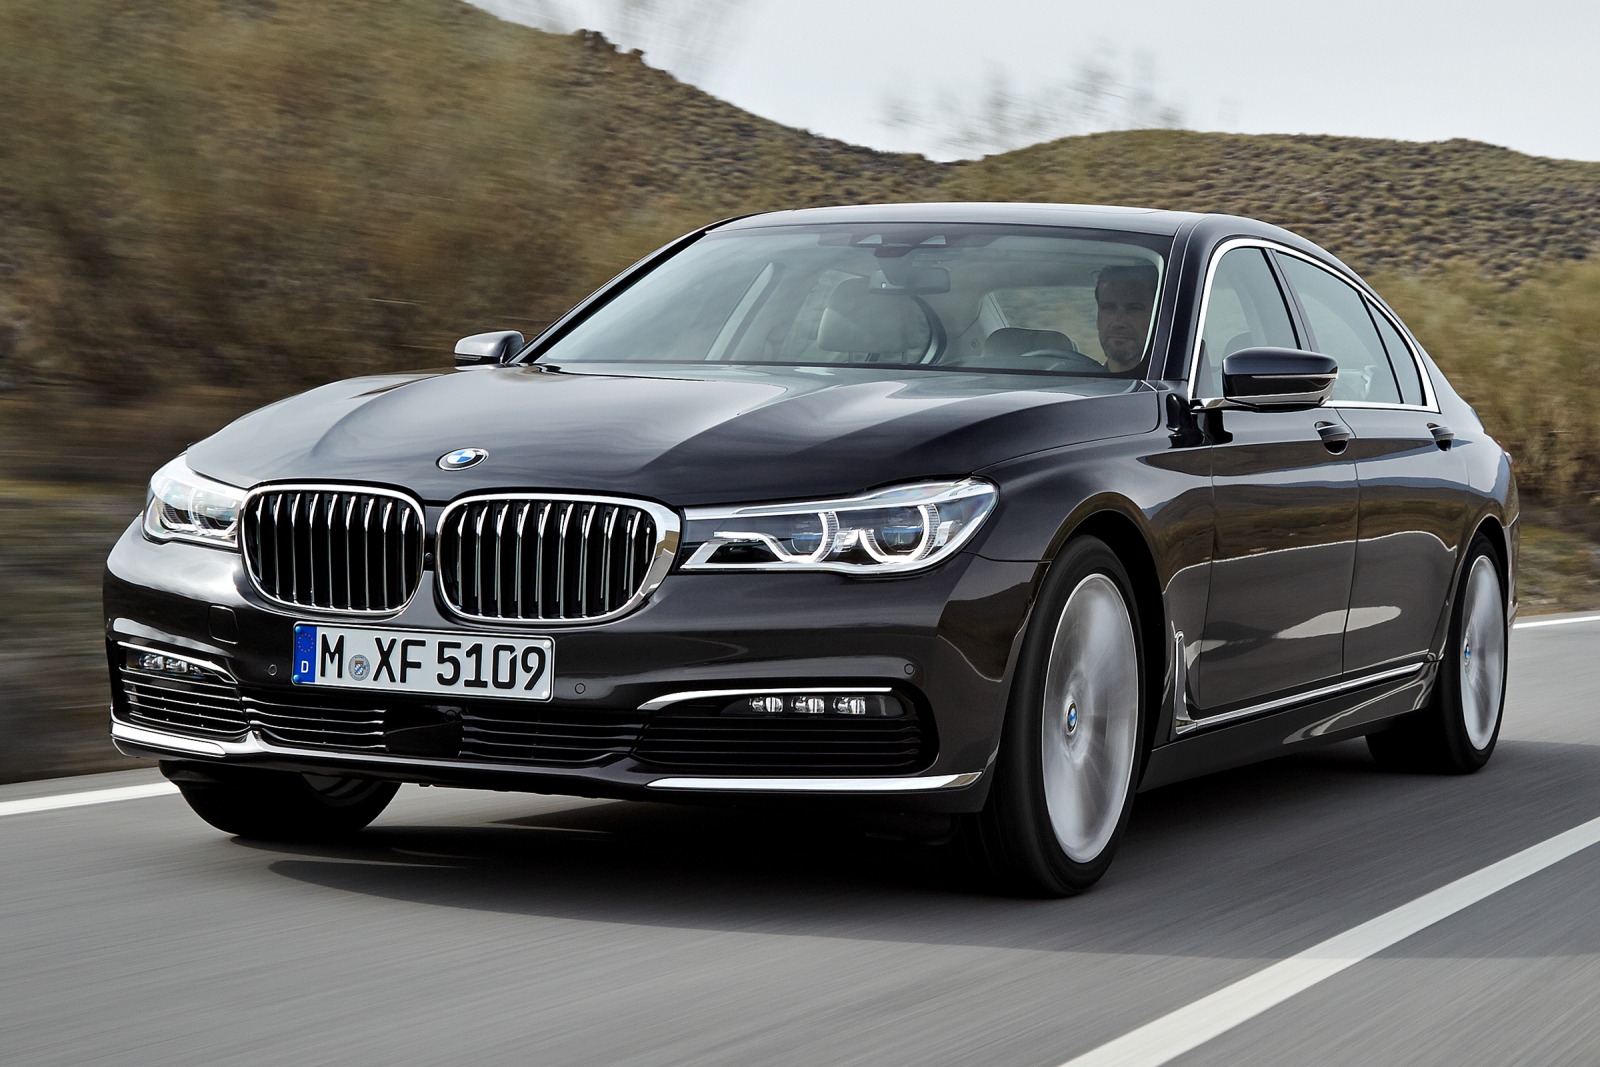 BMW 7 Series 2016 HD Wallpapers free download